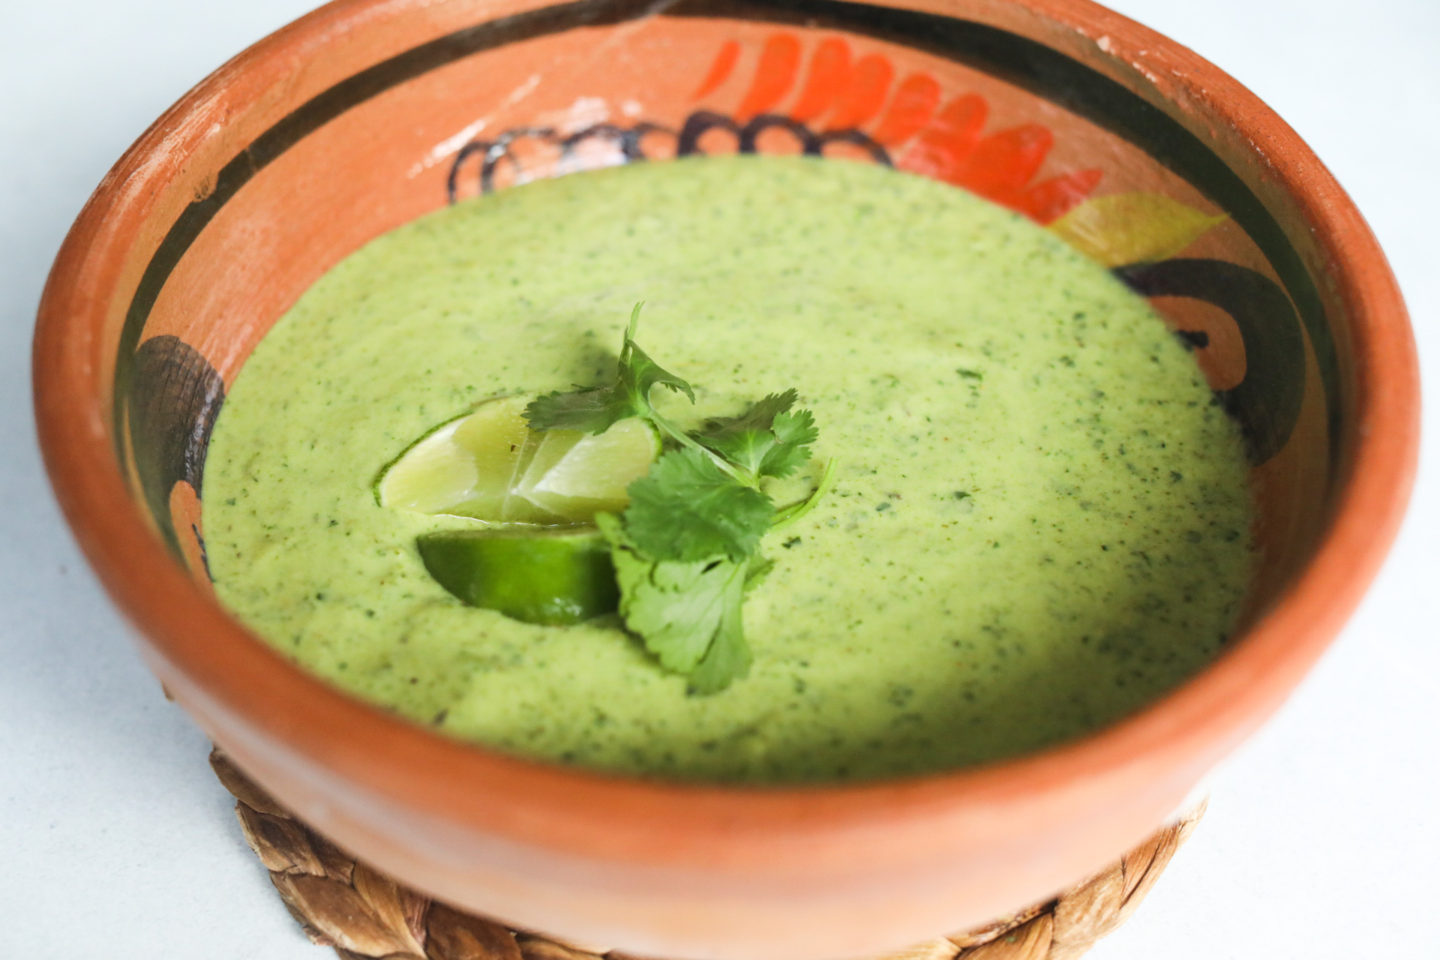 Poblano cream sauced in a clay/brown bowl topped with fresh cilantro and wedges of lime.